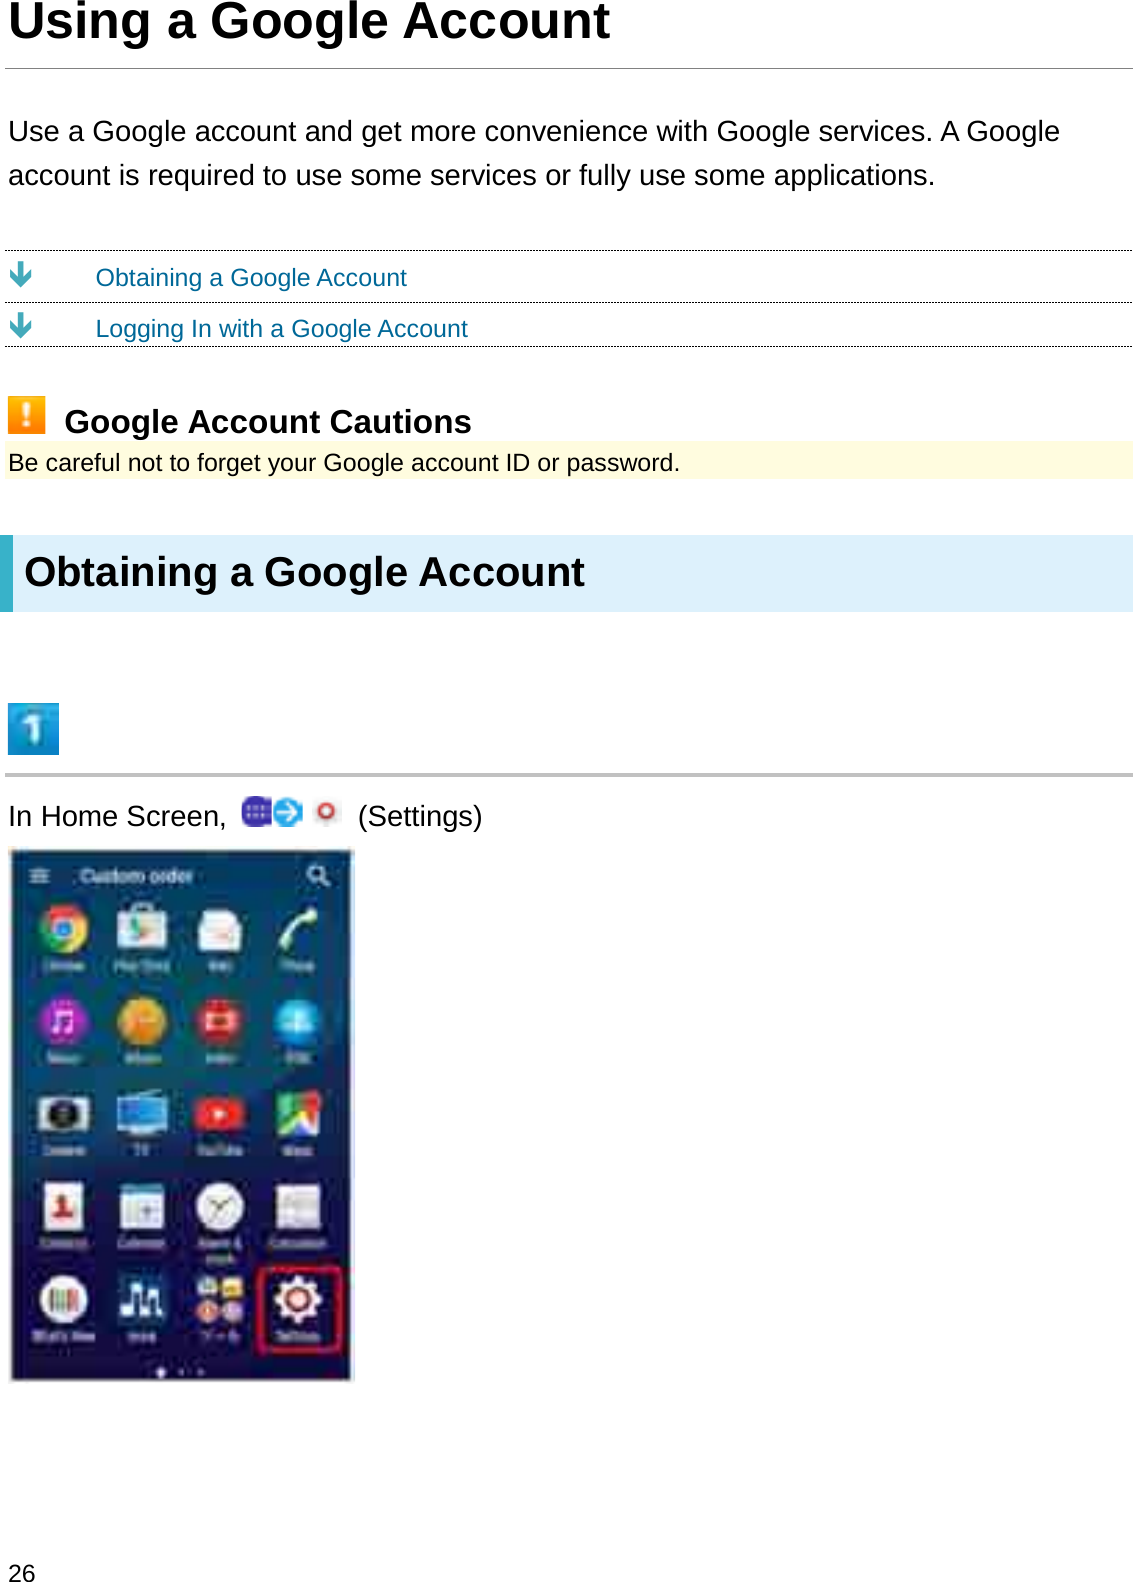 Using a Google AccountUse a Google account and get more convenience with Google services. A Google account is required to use some services or fully use some applications.ÐObtaining a Google AccountÐLogging In with a Google AccountGoogle Account CautionsBe careful not to forget your Google account ID or password.Obtaining a Google AccountIn Home Screen,  (Settings)26